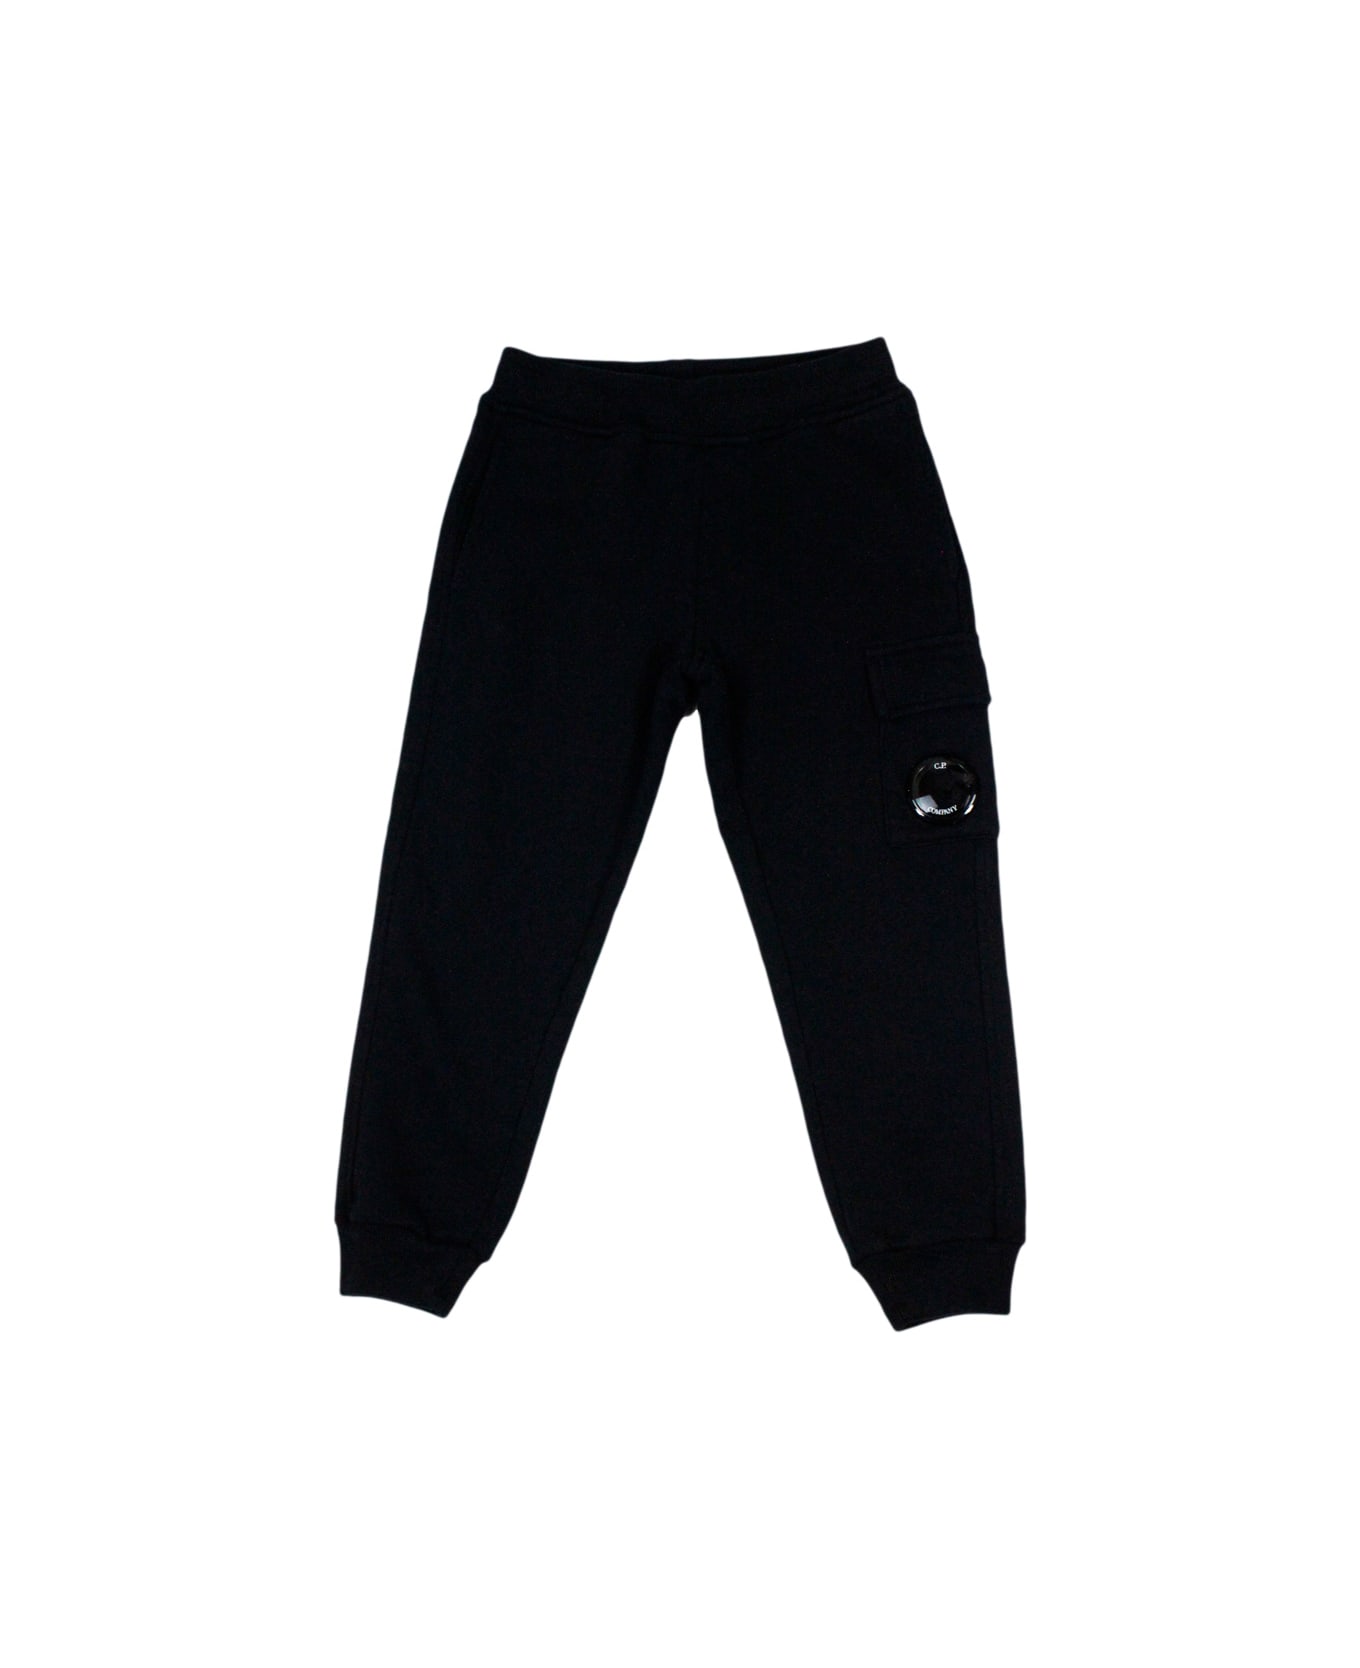 C.P. Company Jogging Trousers In Cotton Fleece With Drawstring At The Waist And Pocket With Magnifying Glass On The Leg - Blu ボトムス